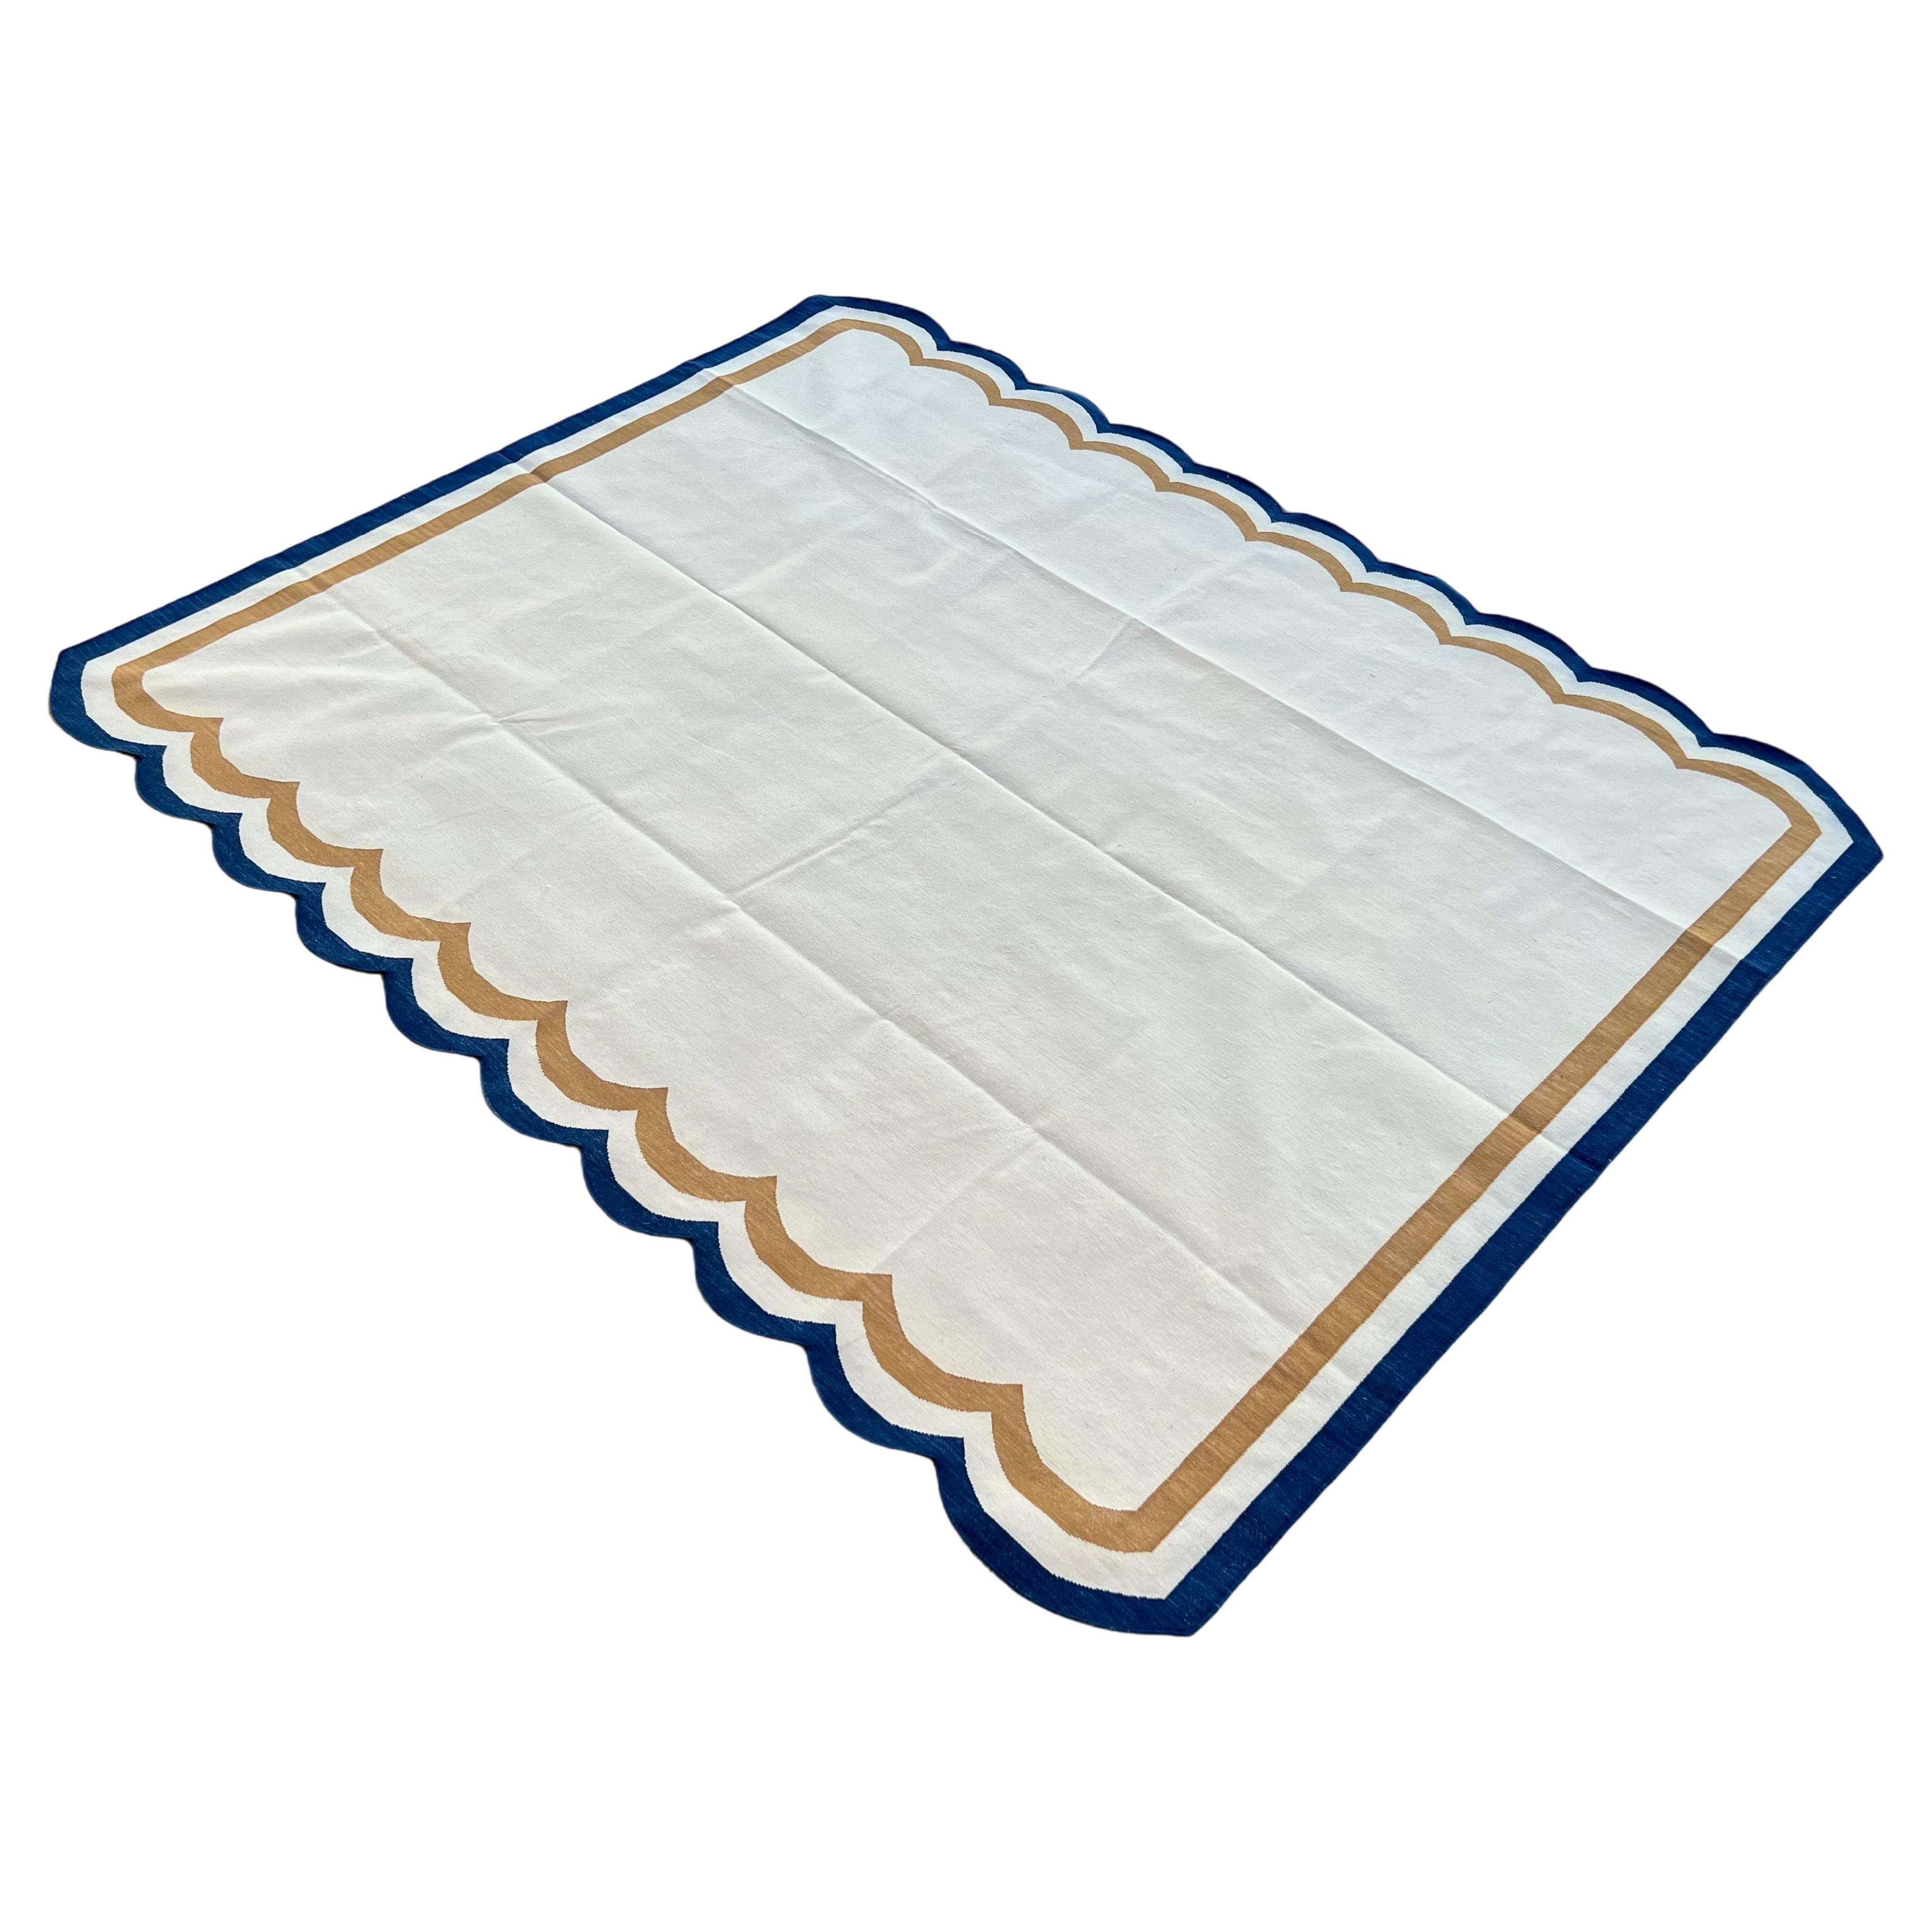 Handmade Cotton Area Flat Weave Rug, 8x10 Cream And Blue Scallop Striped Dhurrie For Sale